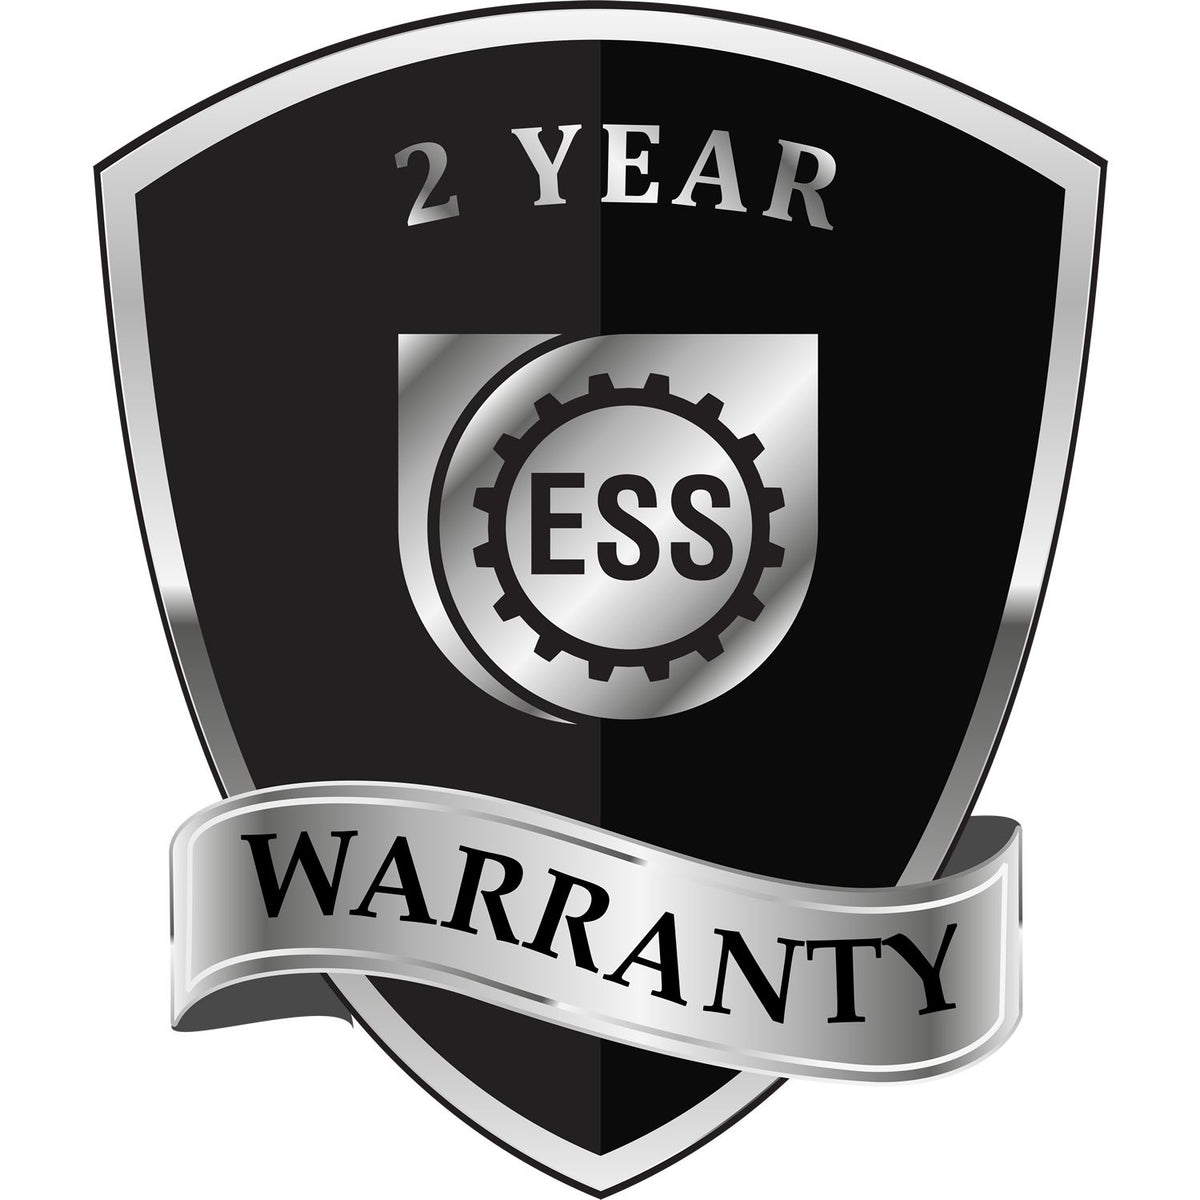 A badge or emblem showing a warranty icon for the Soft District of Columbia Professional Engineer Seal